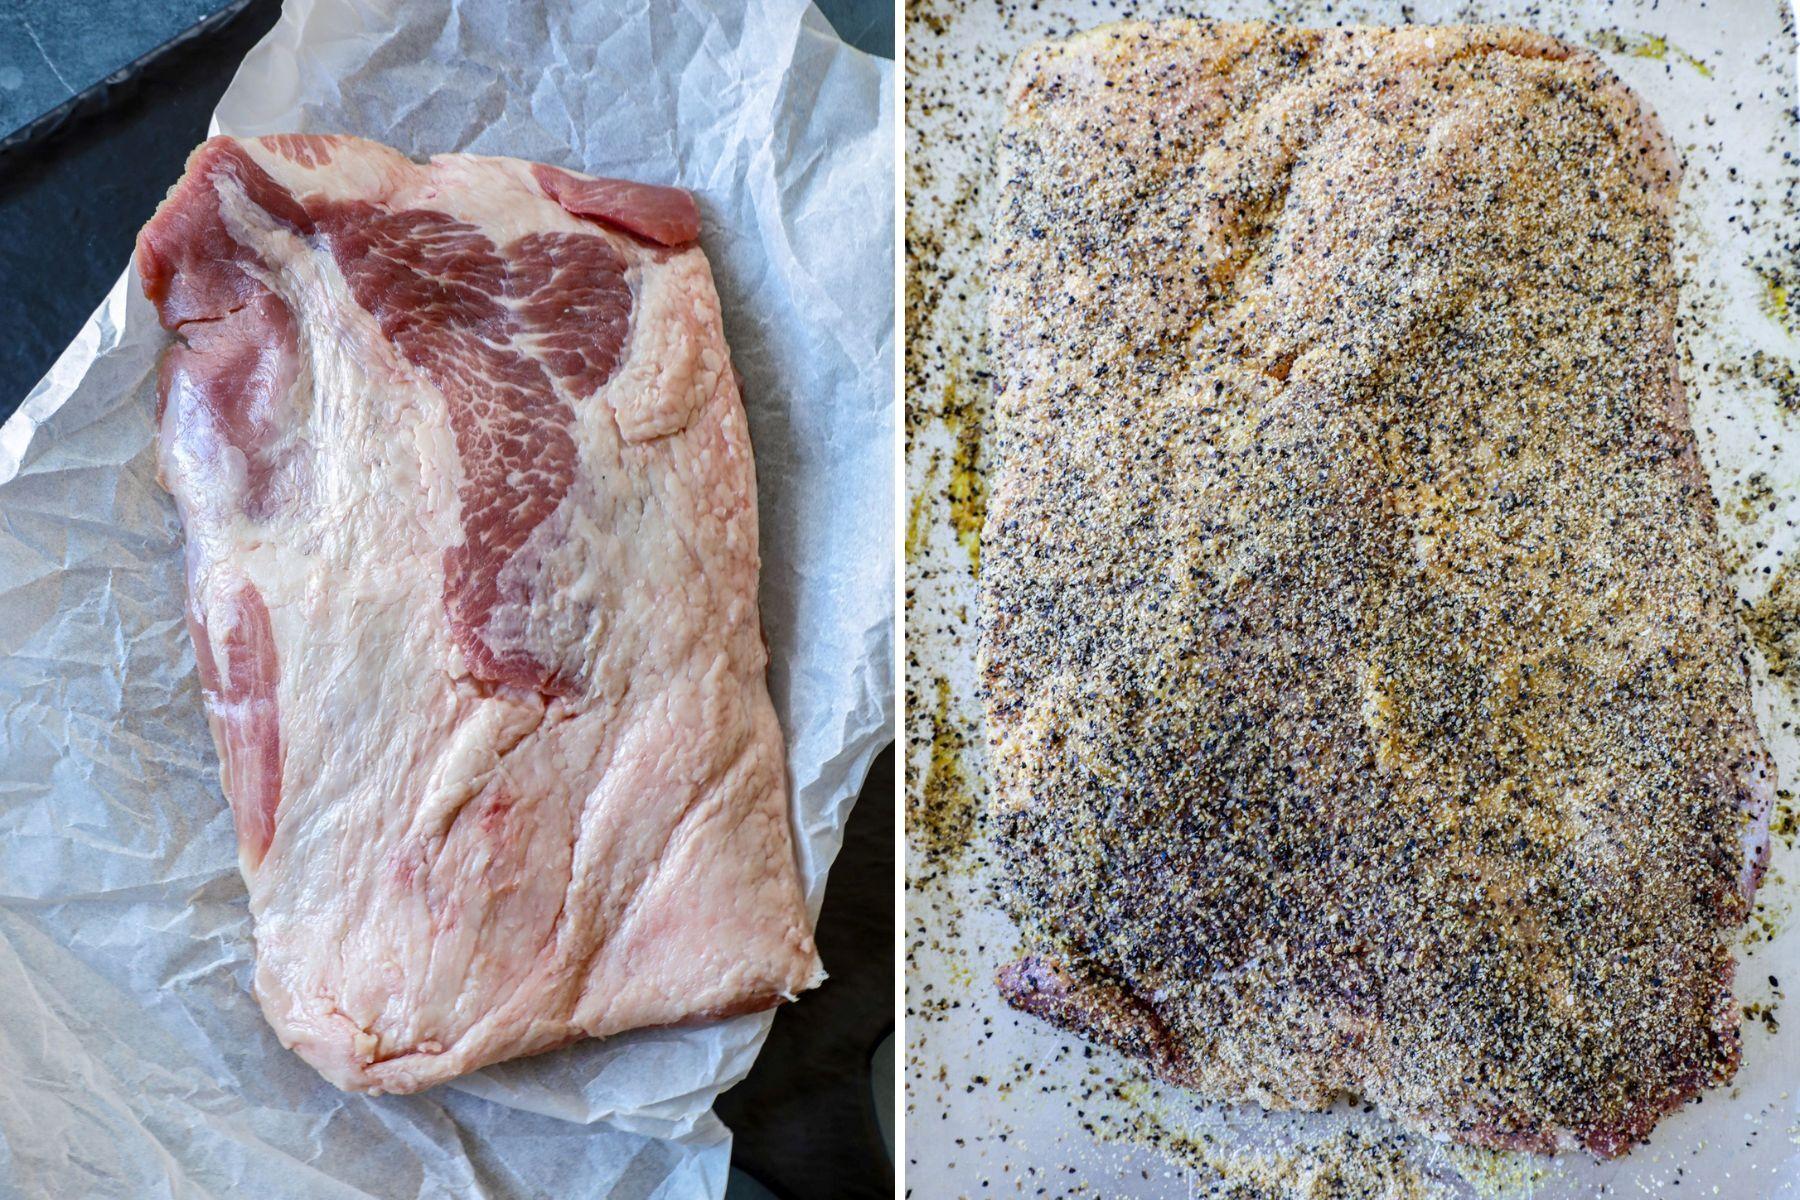 How to prepare a smoked pork brisket for the grill